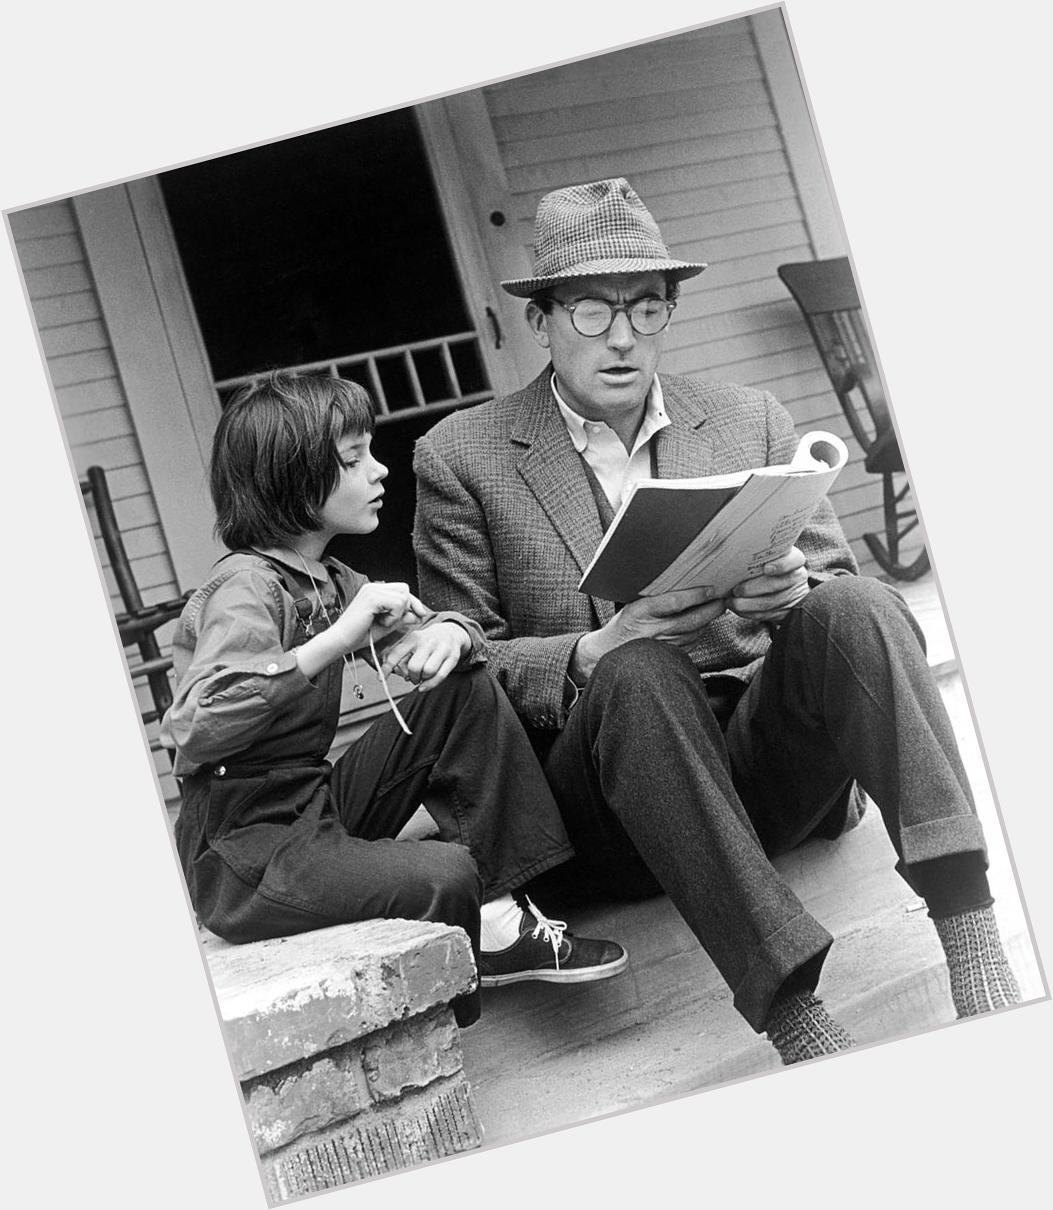 Happy Birthday to Mary Badham, Scout in TO KILL A MOCKINGBIRD, who turns 63 today! 